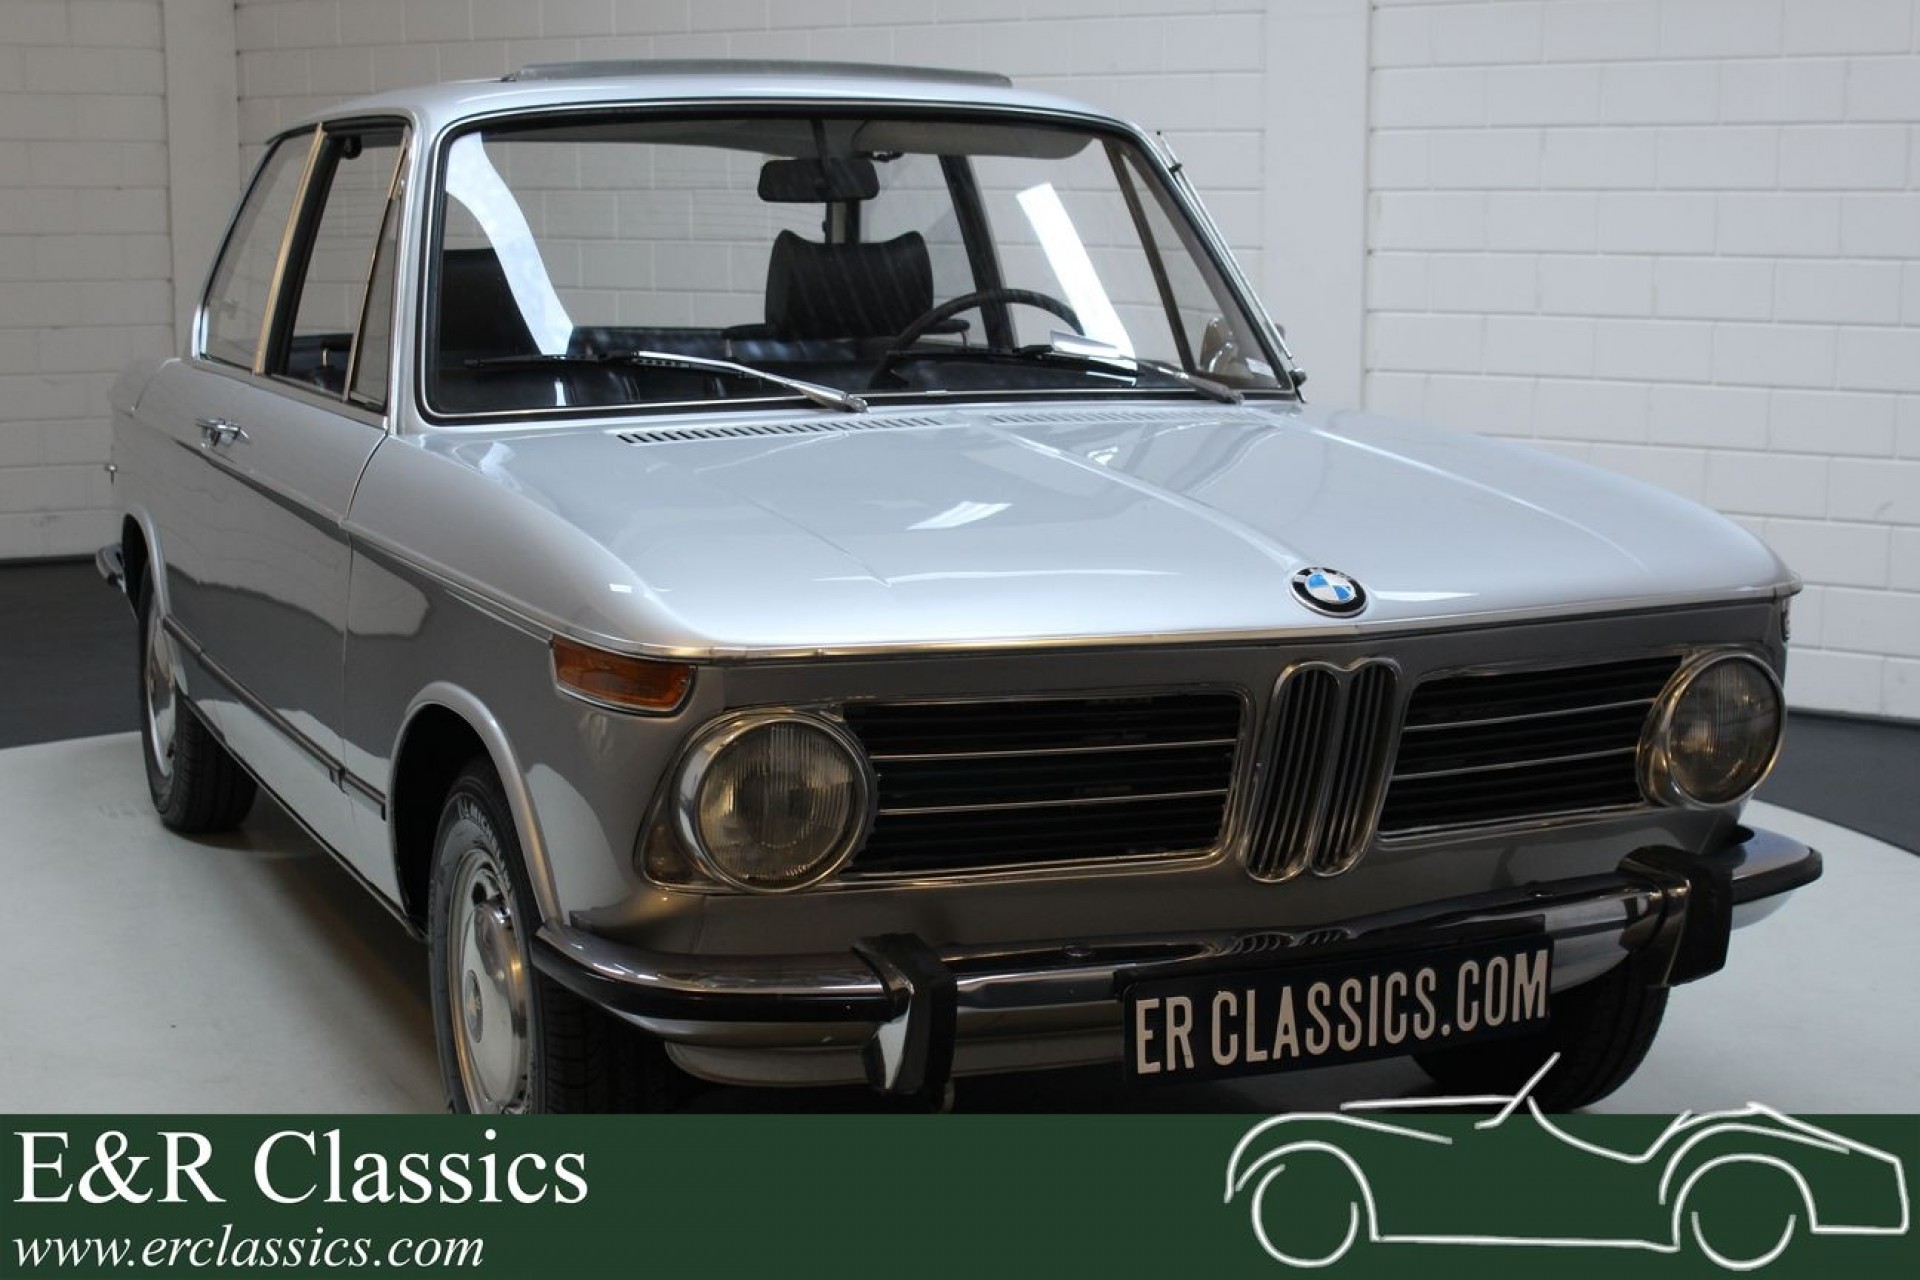 Bmw 02 Coupe 1973 For Sale At E R Classics